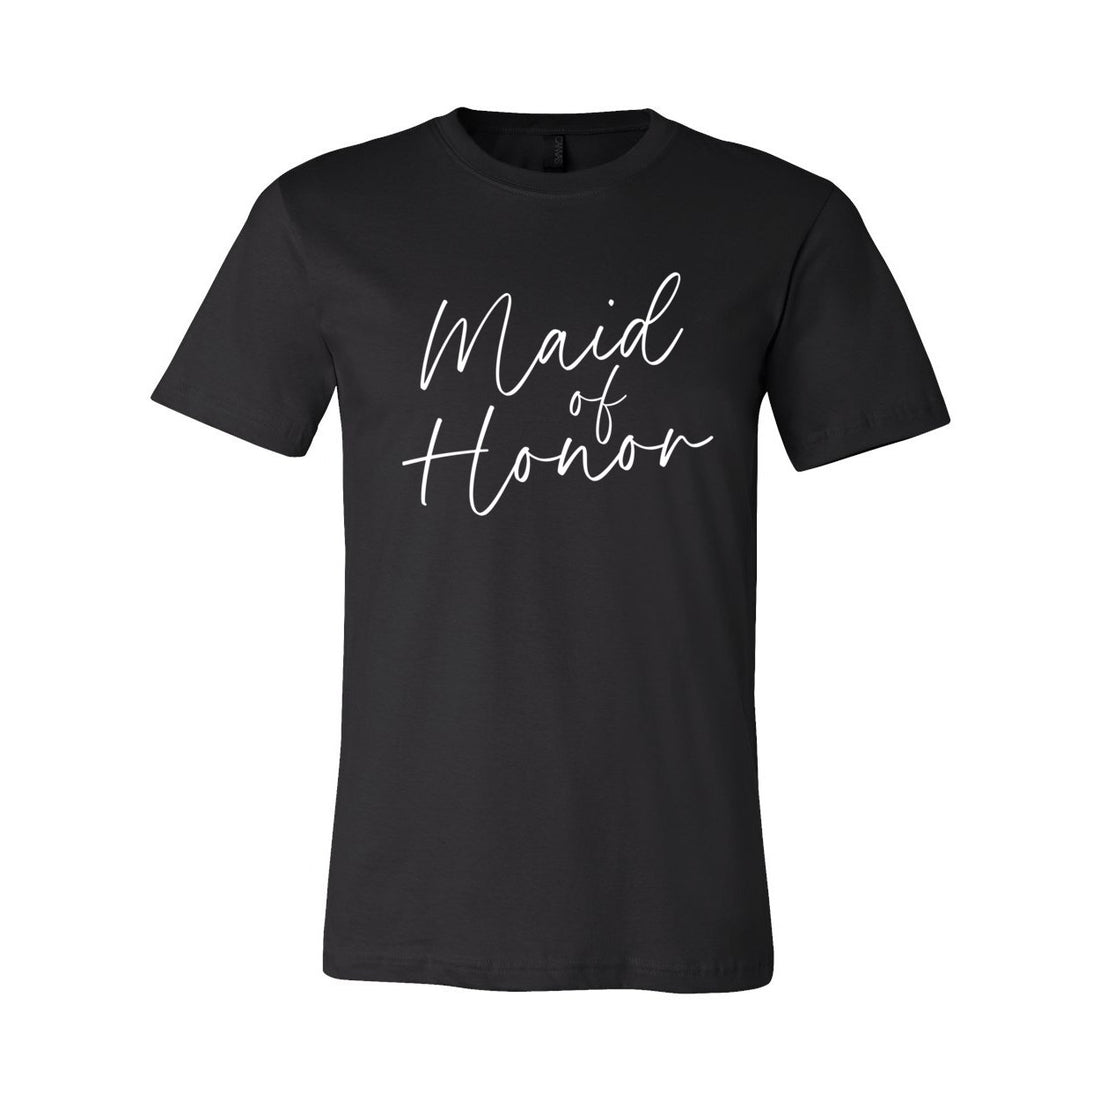 #9 Signature Maid of Honor Jersey Tee - T-Shirts - Positively Sassy - #9 Signature Maid of Honor Jersey Tee